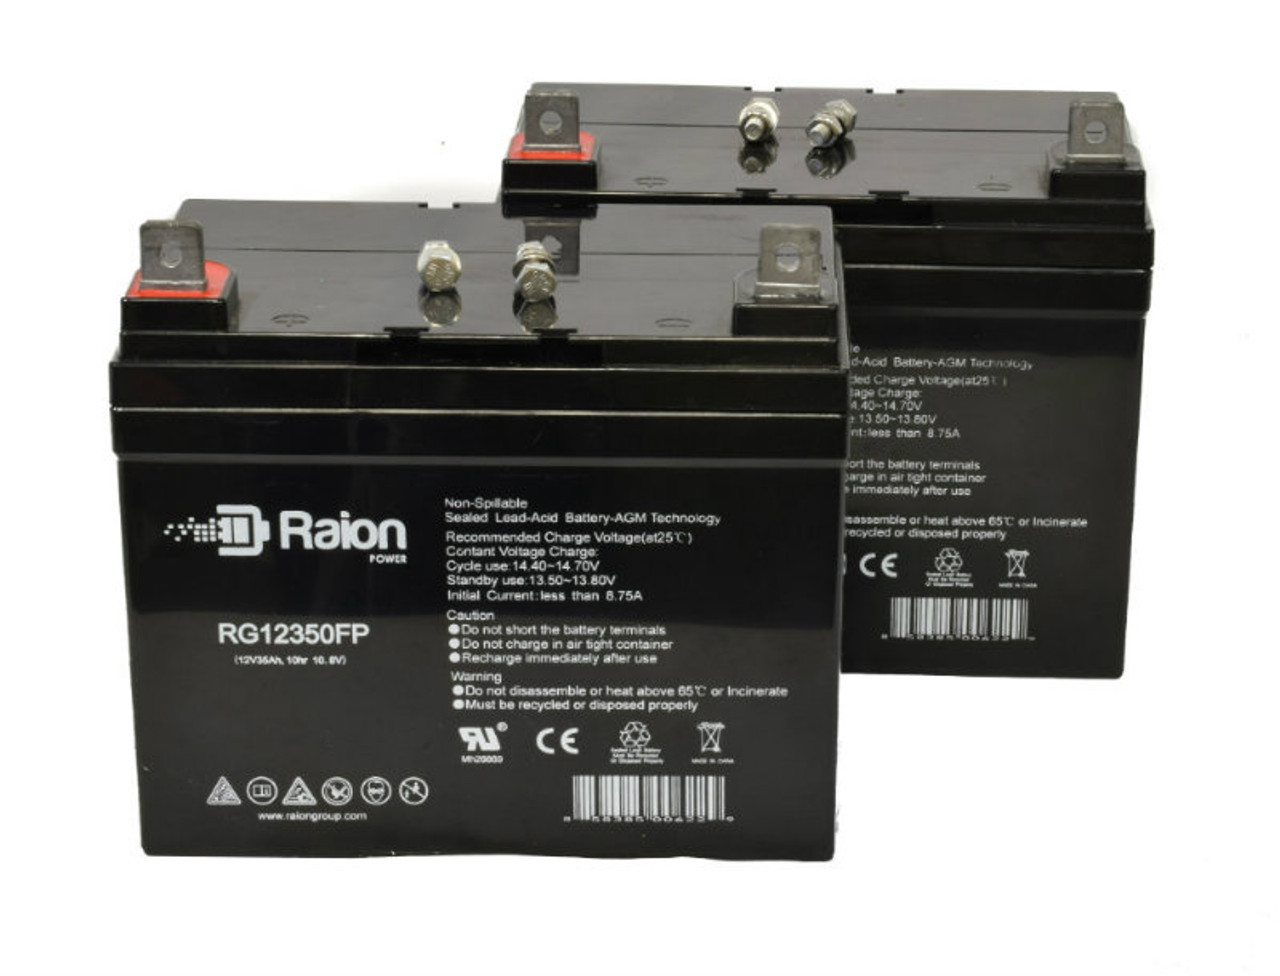 Raion Power Replacement 12V 35Ah Group U1 Battery for National Battery C35U1 - 2 Pack